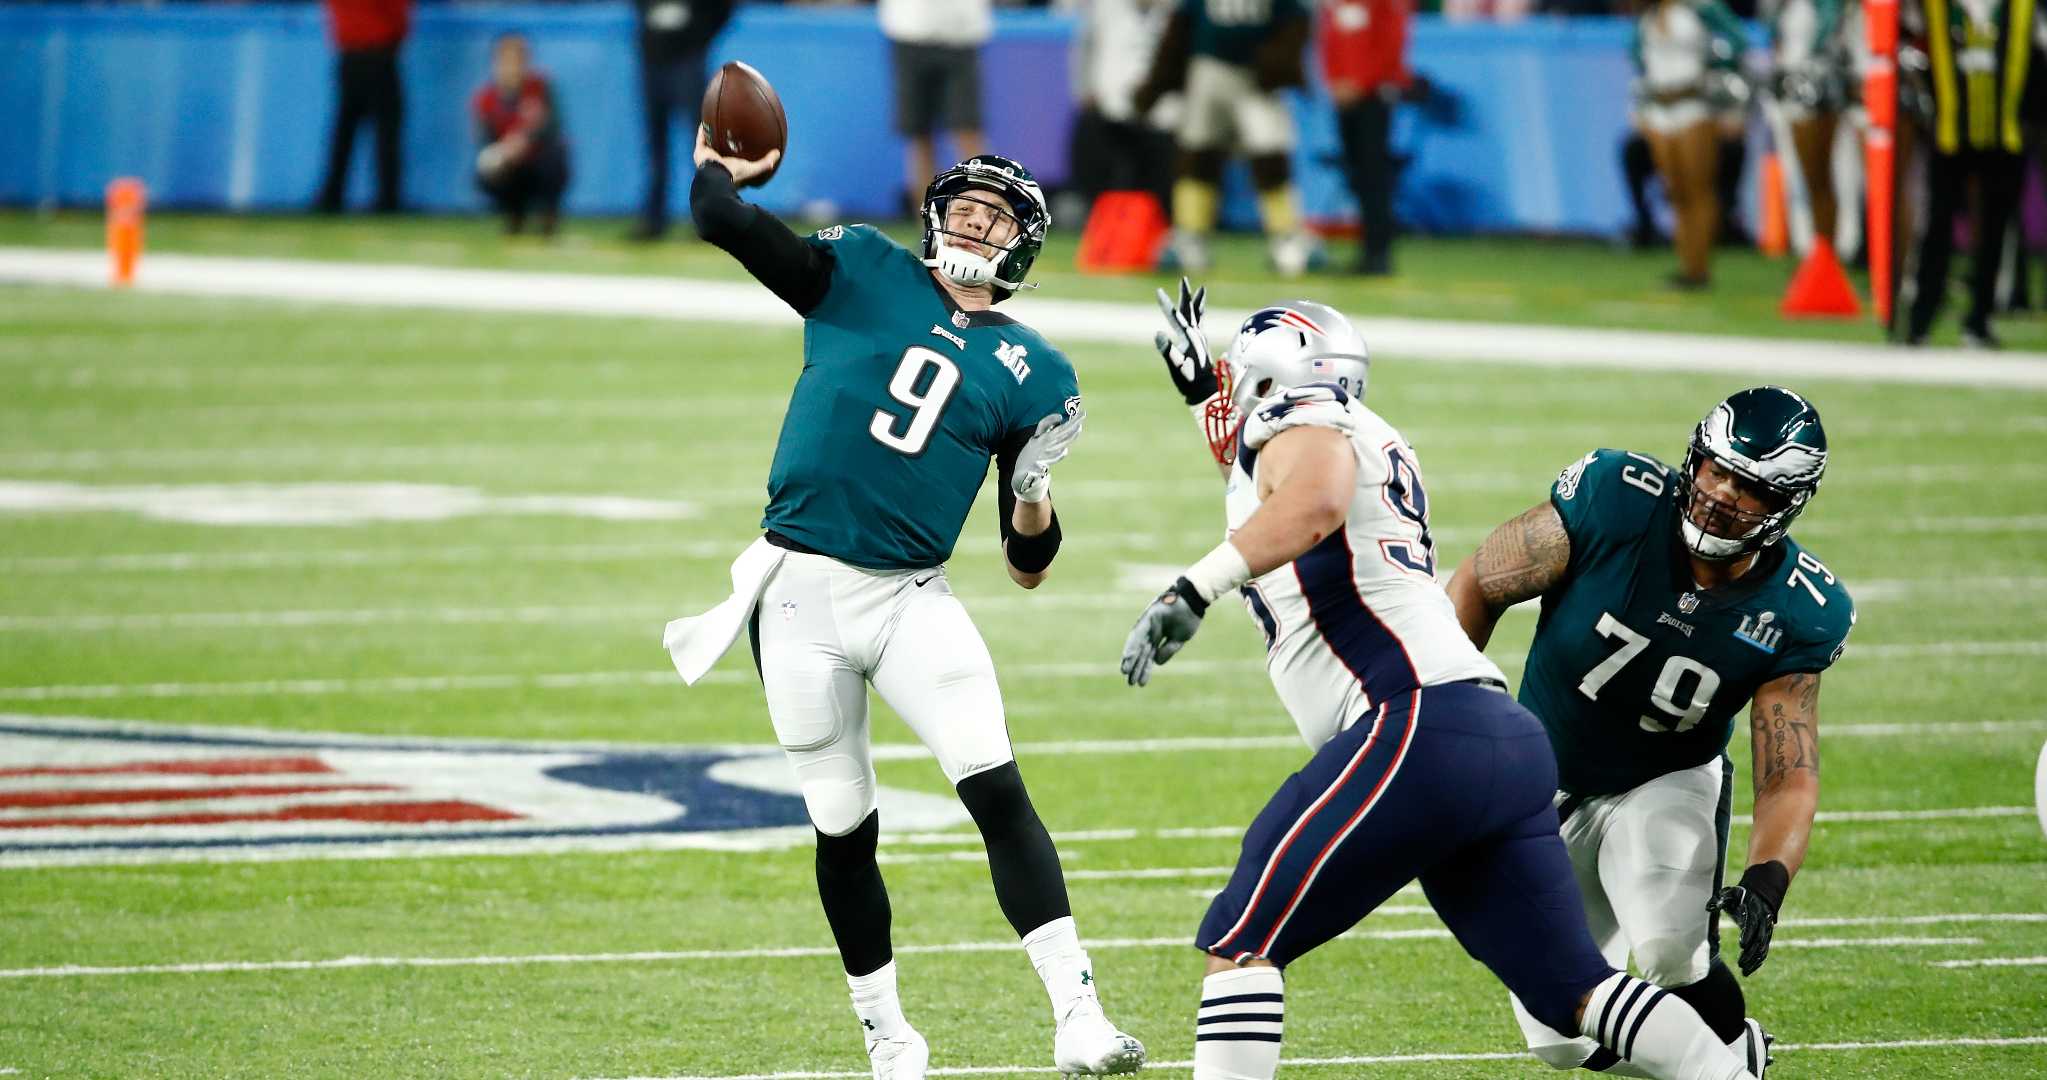 Nick Foles #9 of the Philadelphia Eagles throws a pass against the New England Patriots during Super Bowl LII at U.S. Bank Stadium on February 4, 2018 in Minneapolis, Minnesota. (Photo by Andy Lyons/Getty Images)